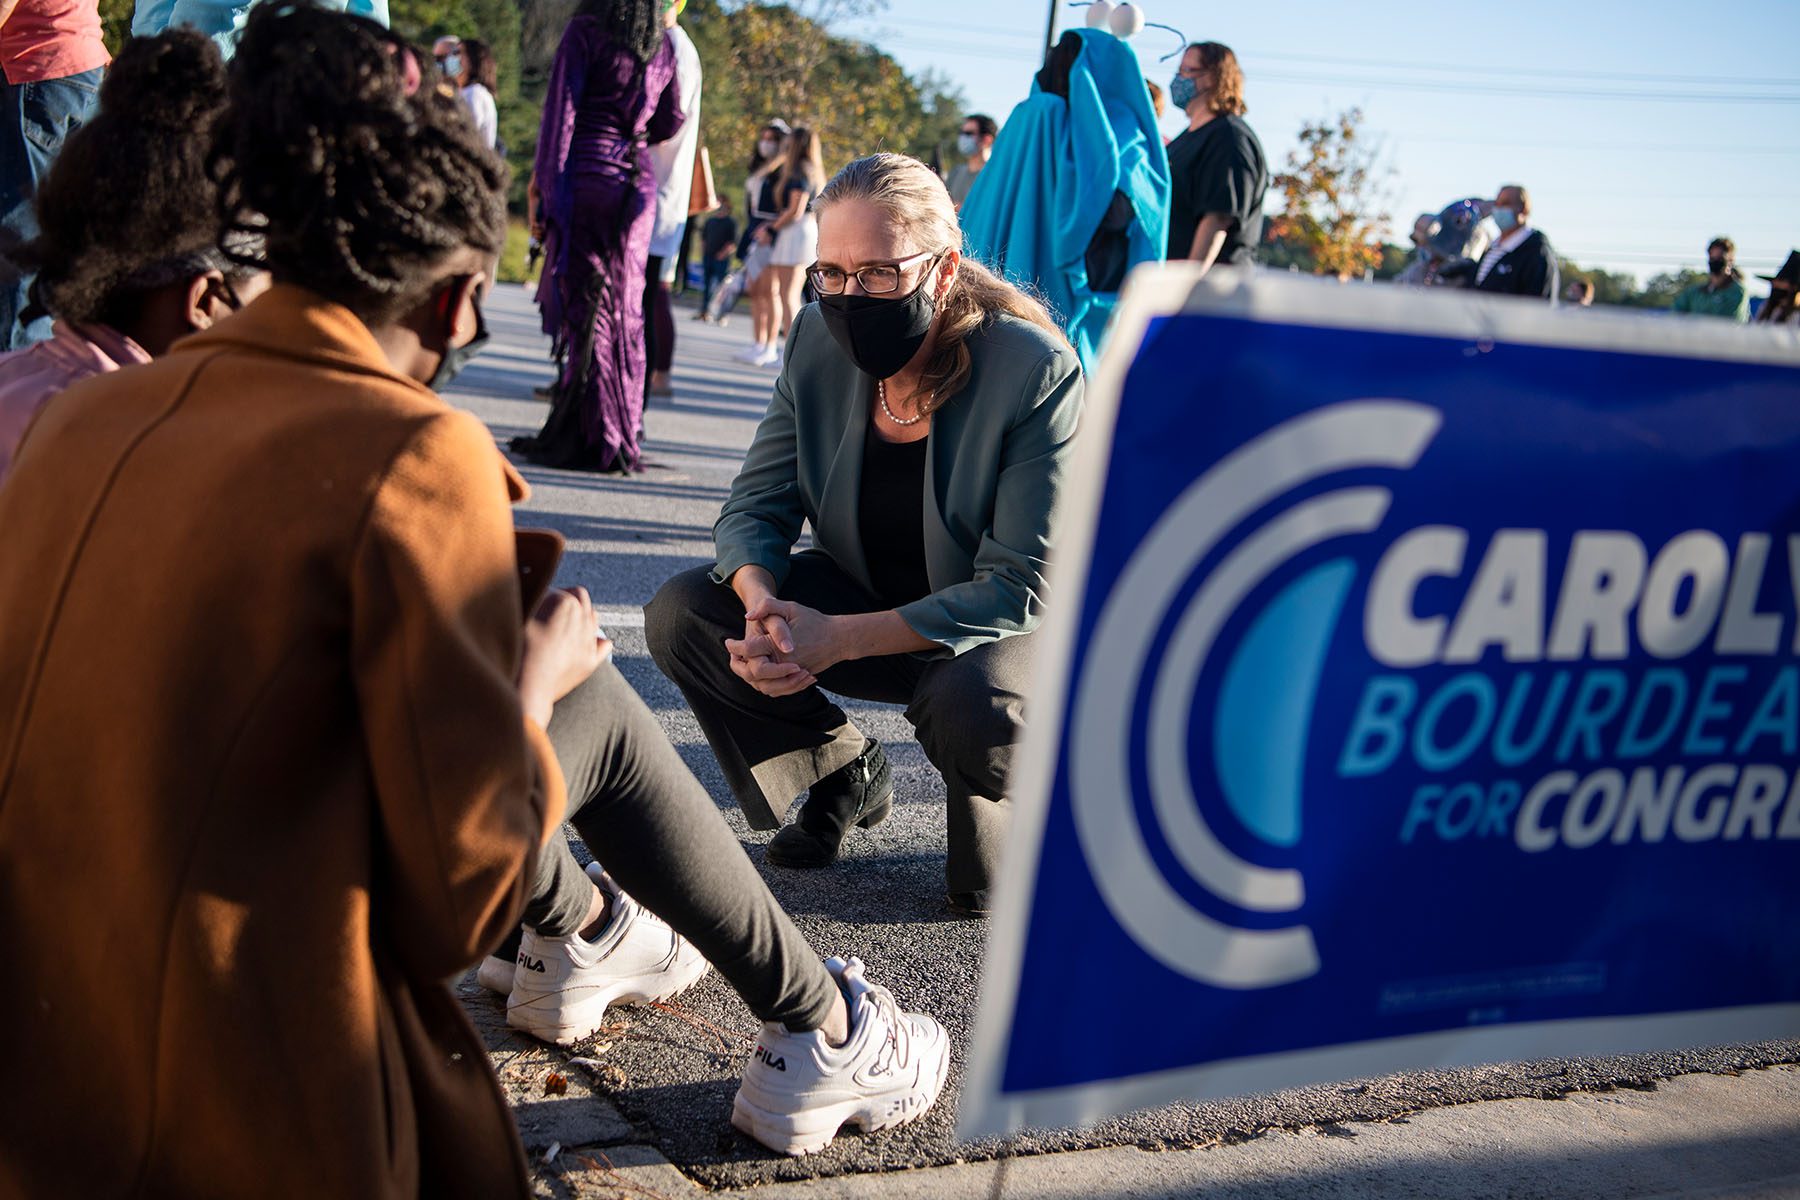 Carolyn Bourdeaux kneels to speak to supporters sitting on a curb. A sign that reads "Carolyn Bourdeaux for Congress" is seen in the foreground.